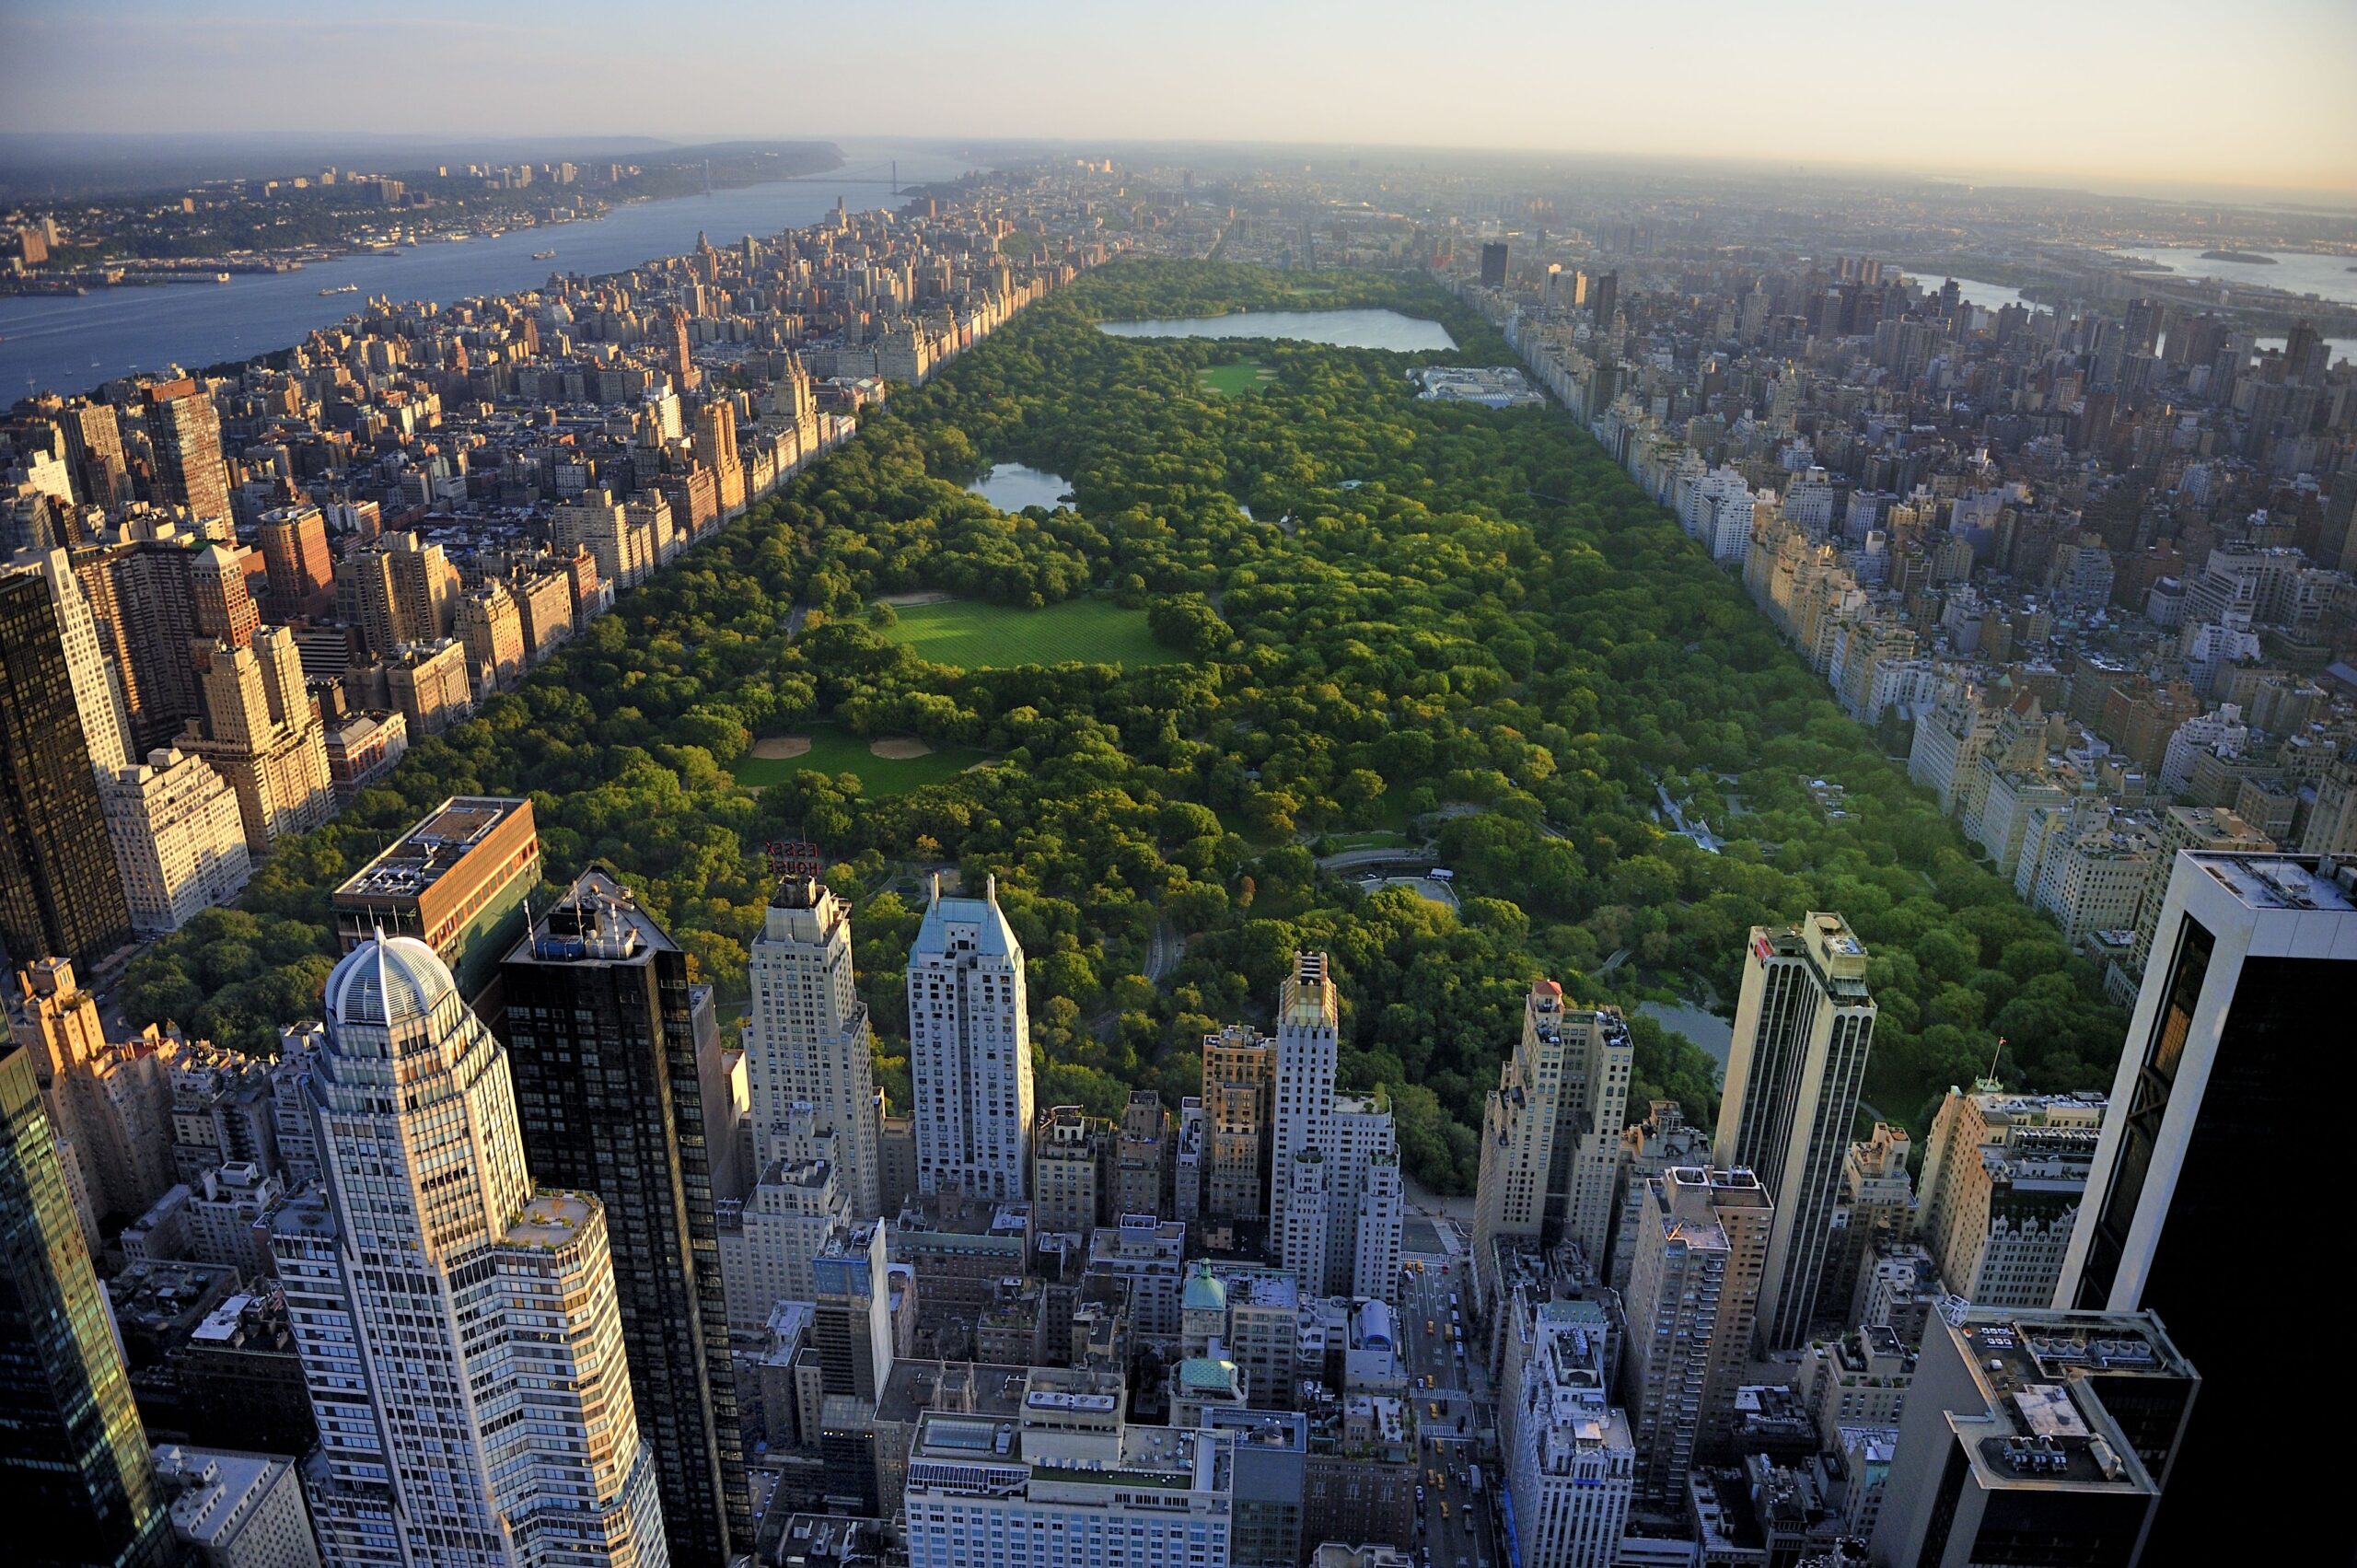 An aerial view of New York, from one of the best lookout spots in New York City